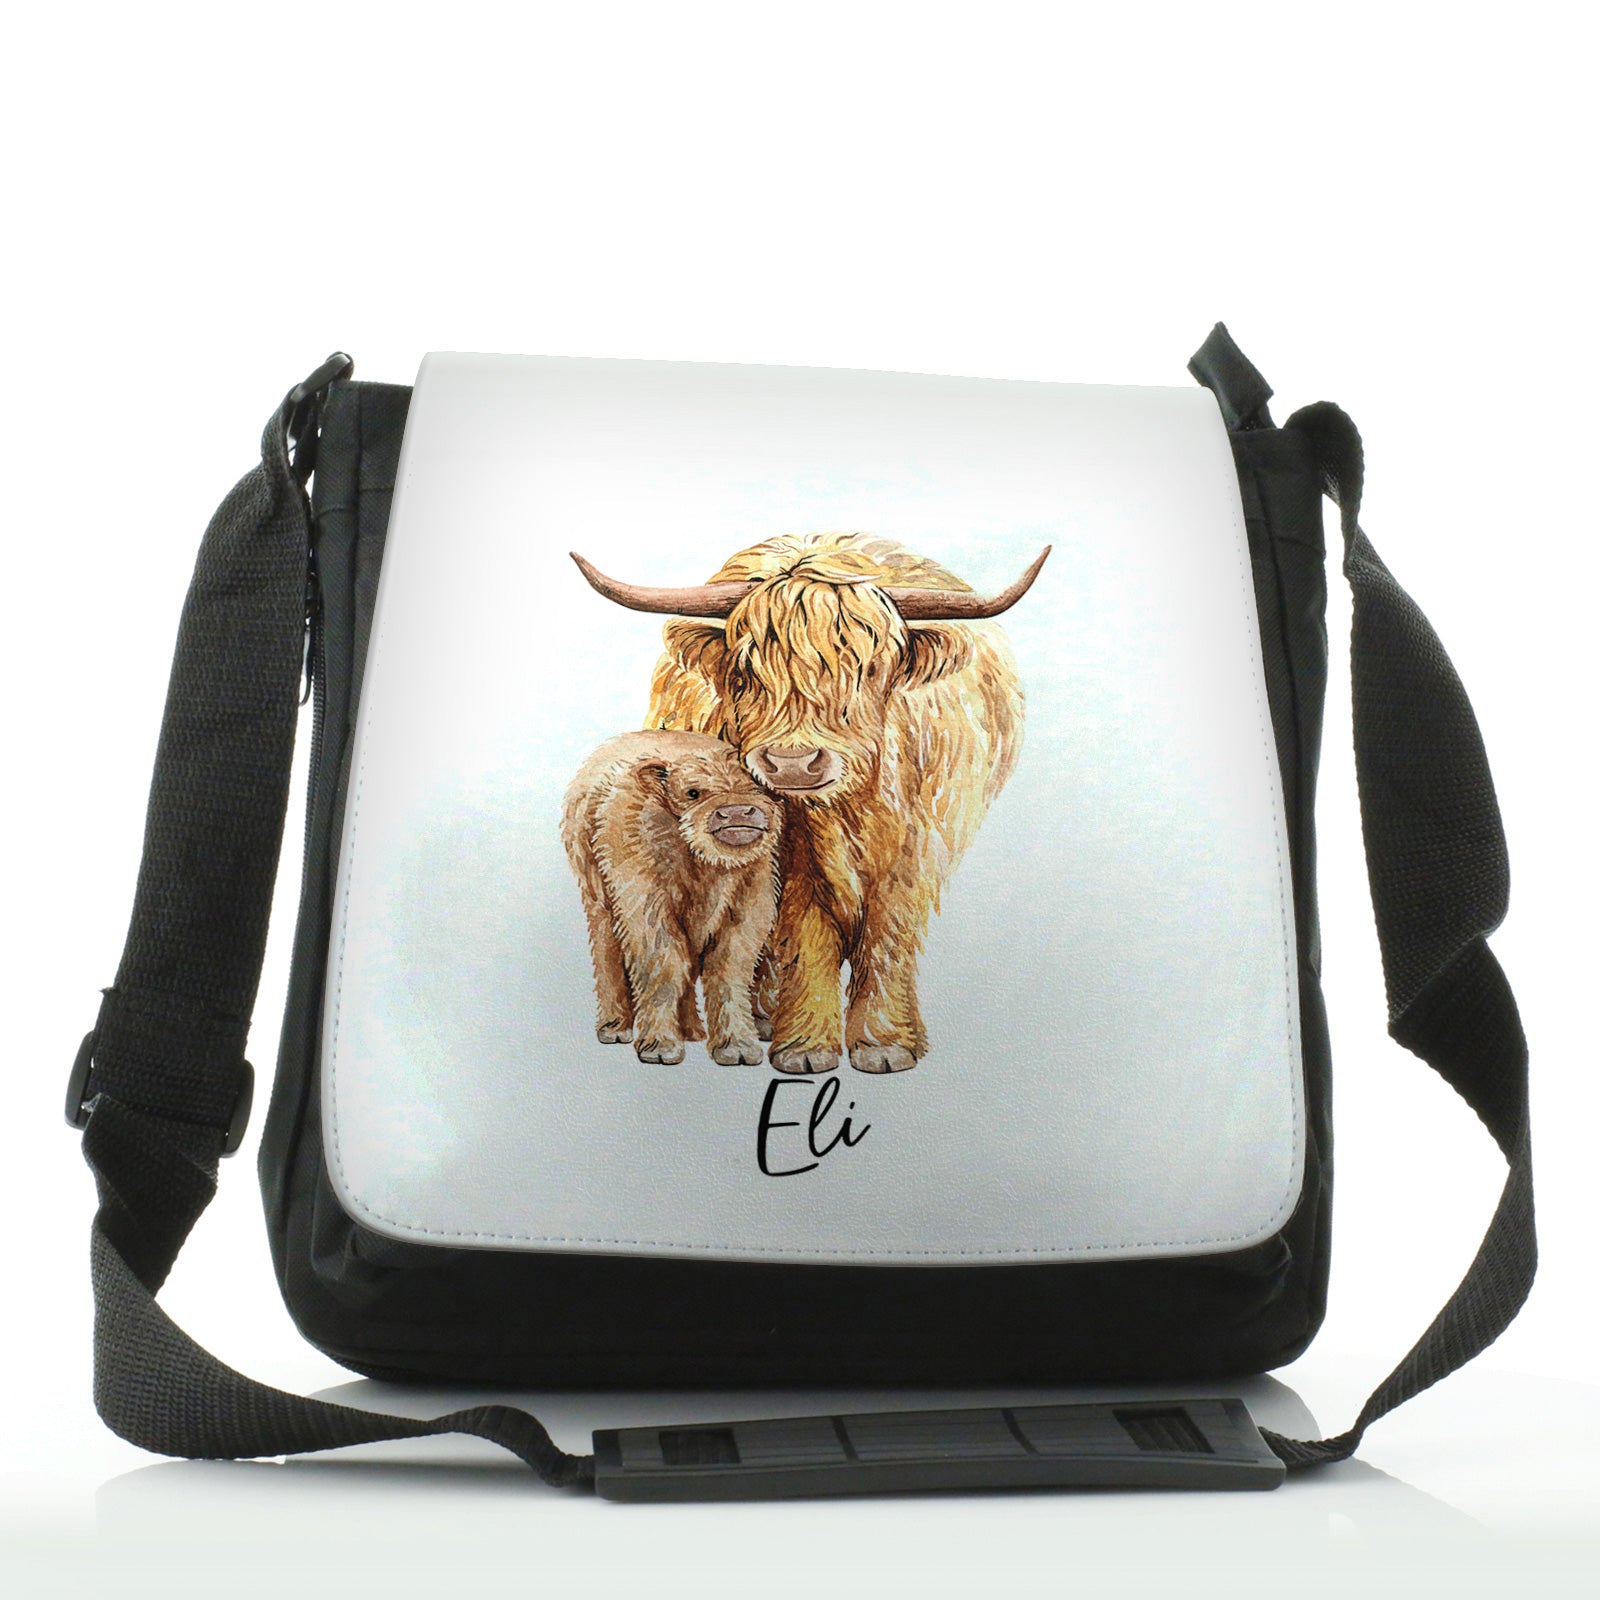 Personalised Shoulder Bag with Welcoming Text and Relaxing Mum and Baby Highland Cows